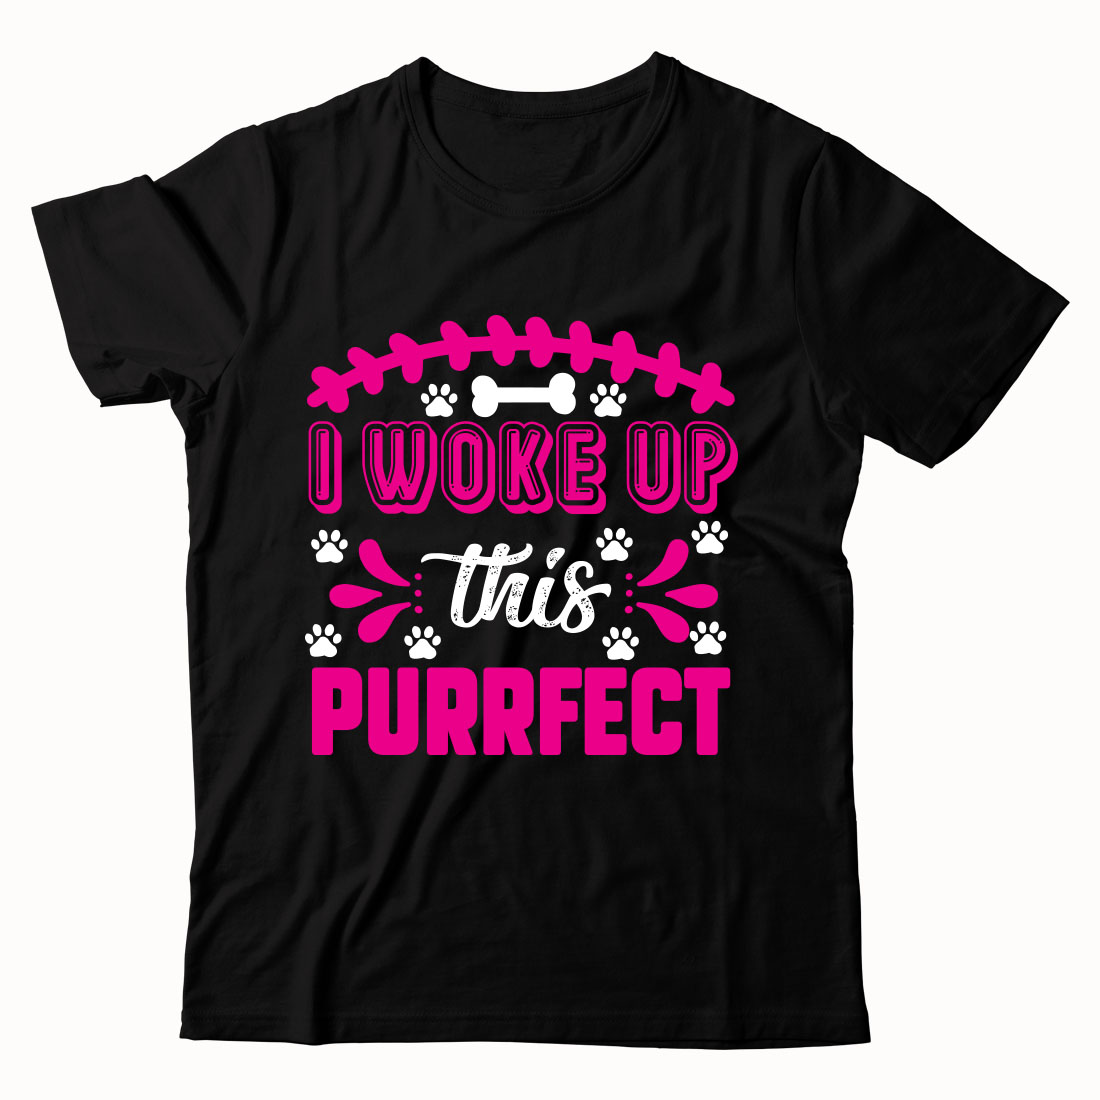 Black shirt with pink lettering that says i woke up this purrfect.